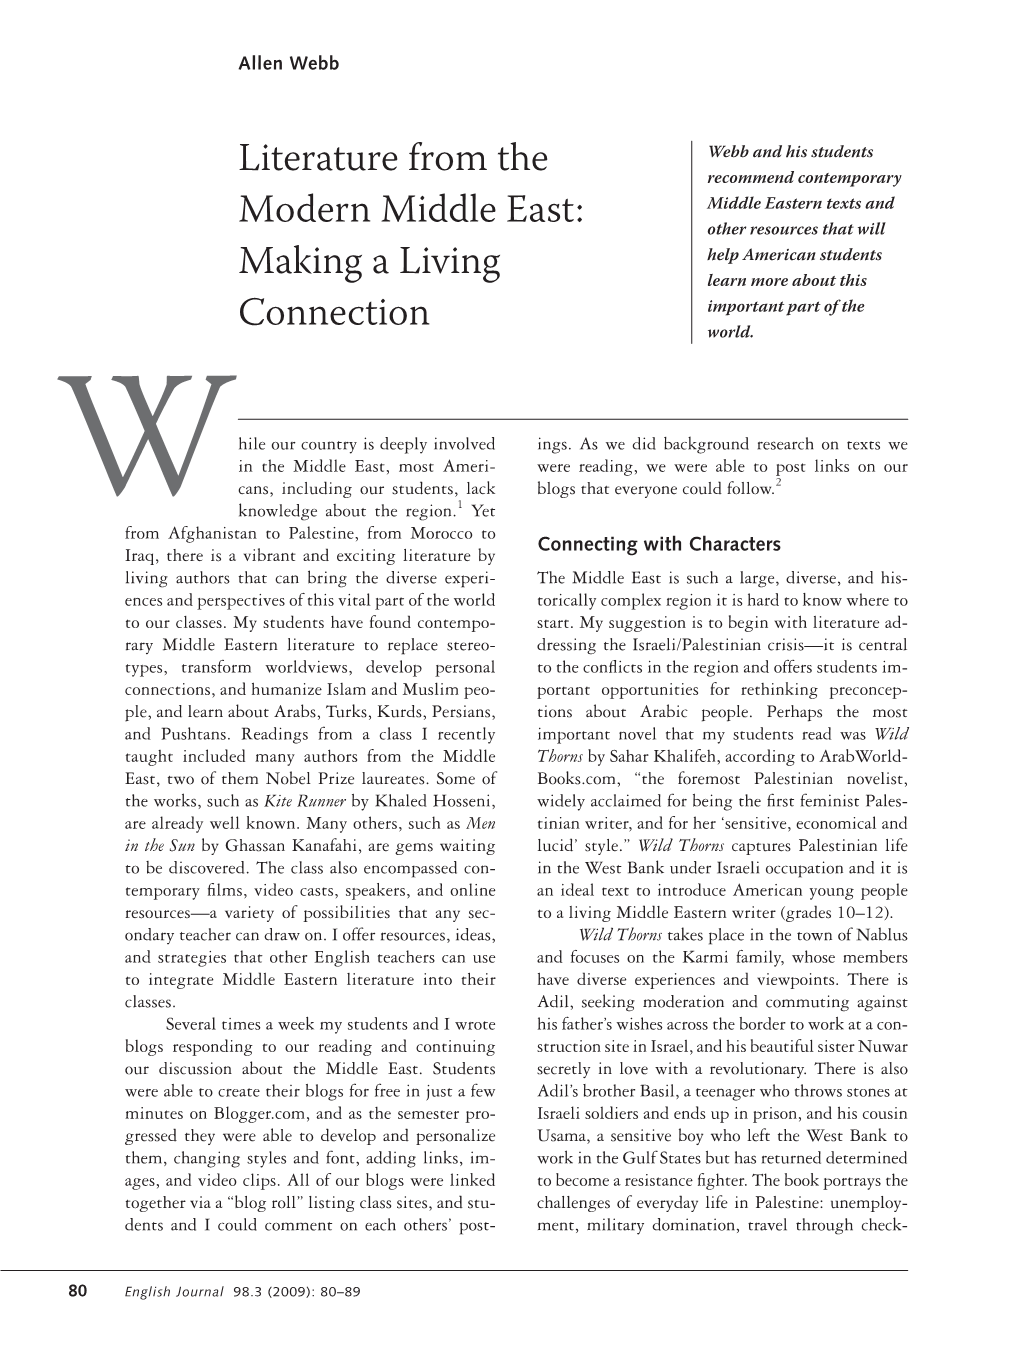 Literature from the Modern Middle East: Making a Living Connection